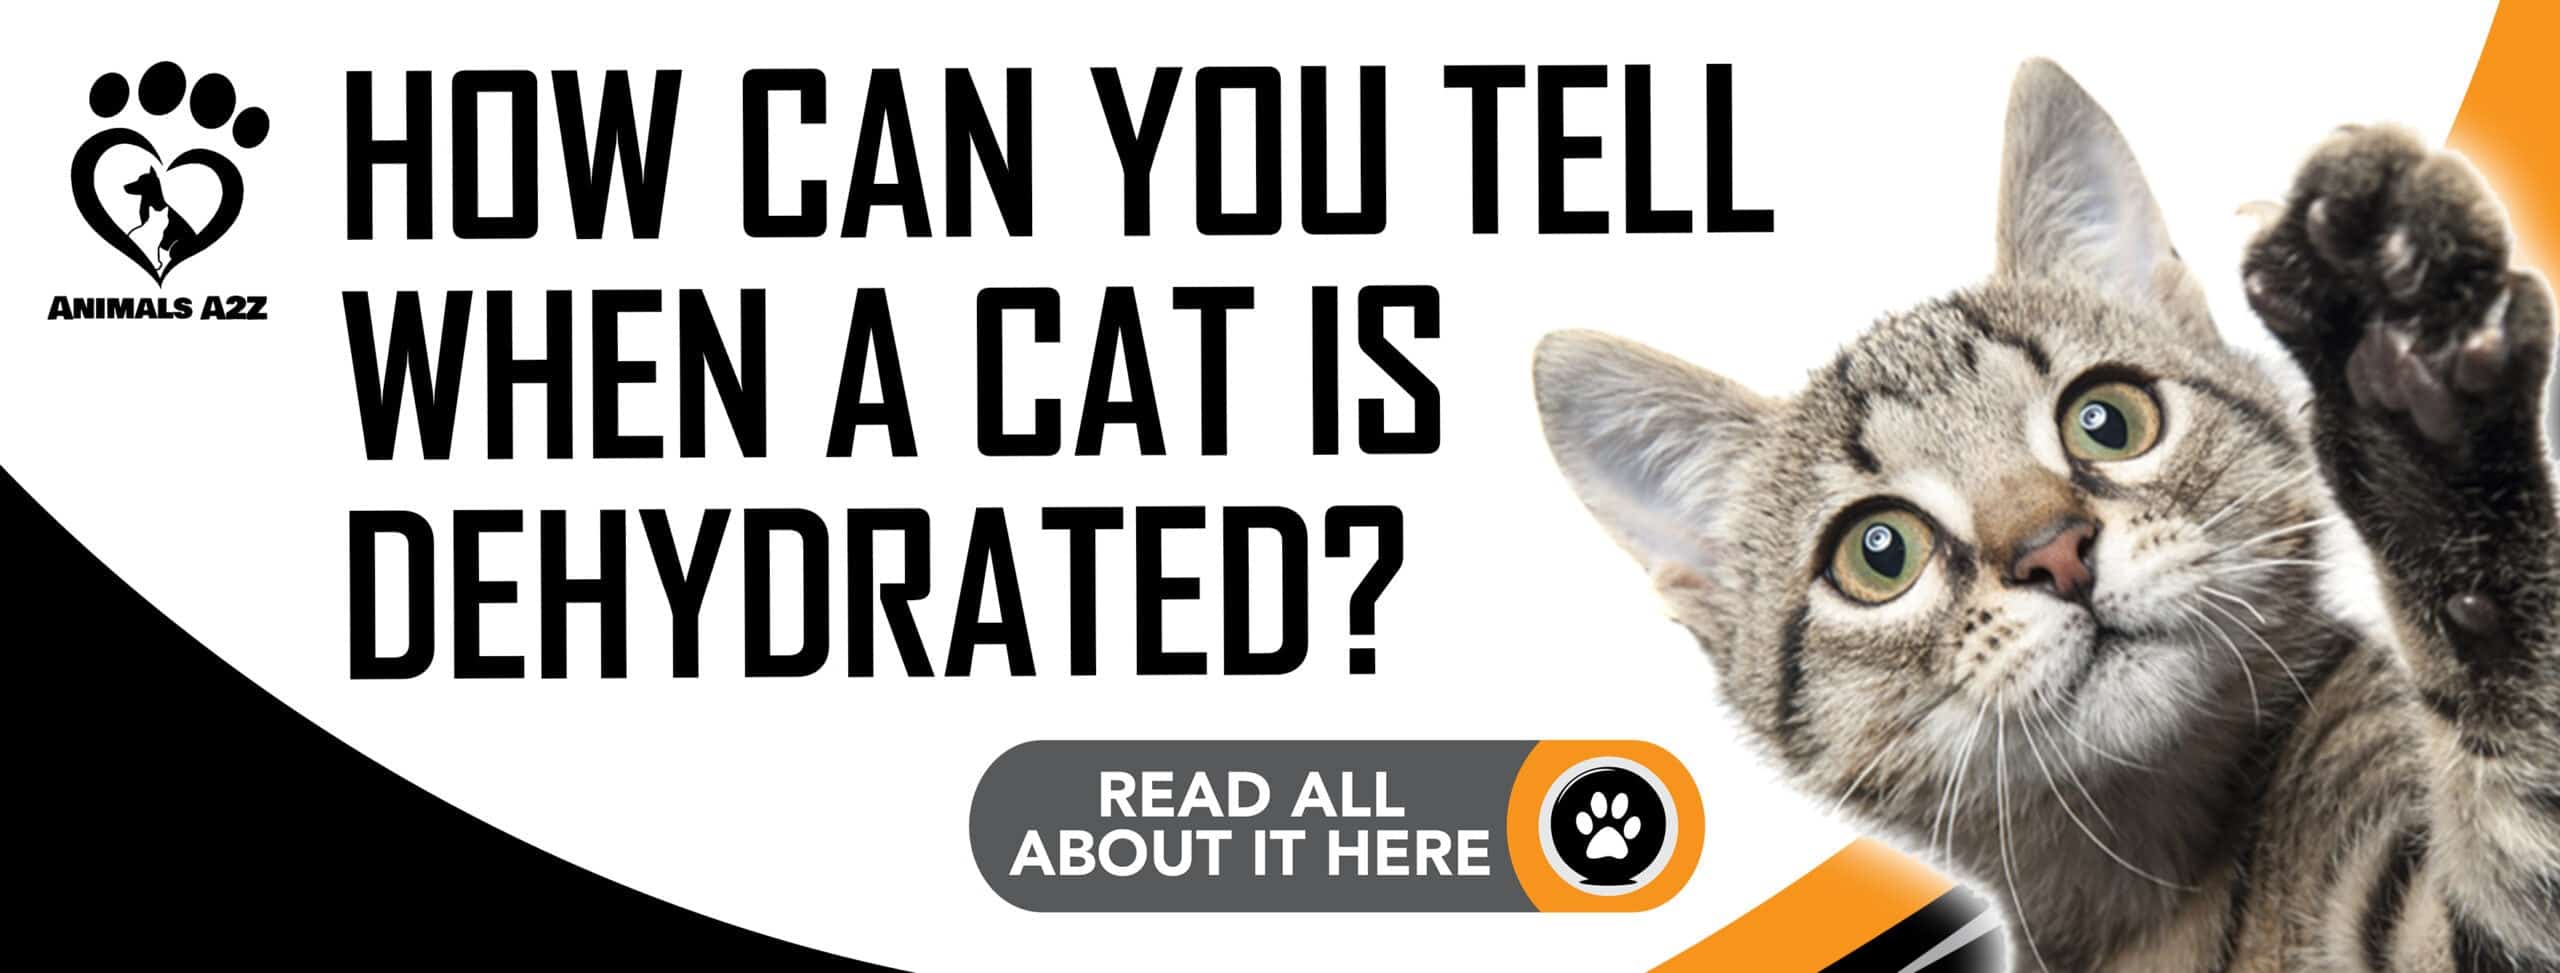 How can you tell when a cat is dehydrated